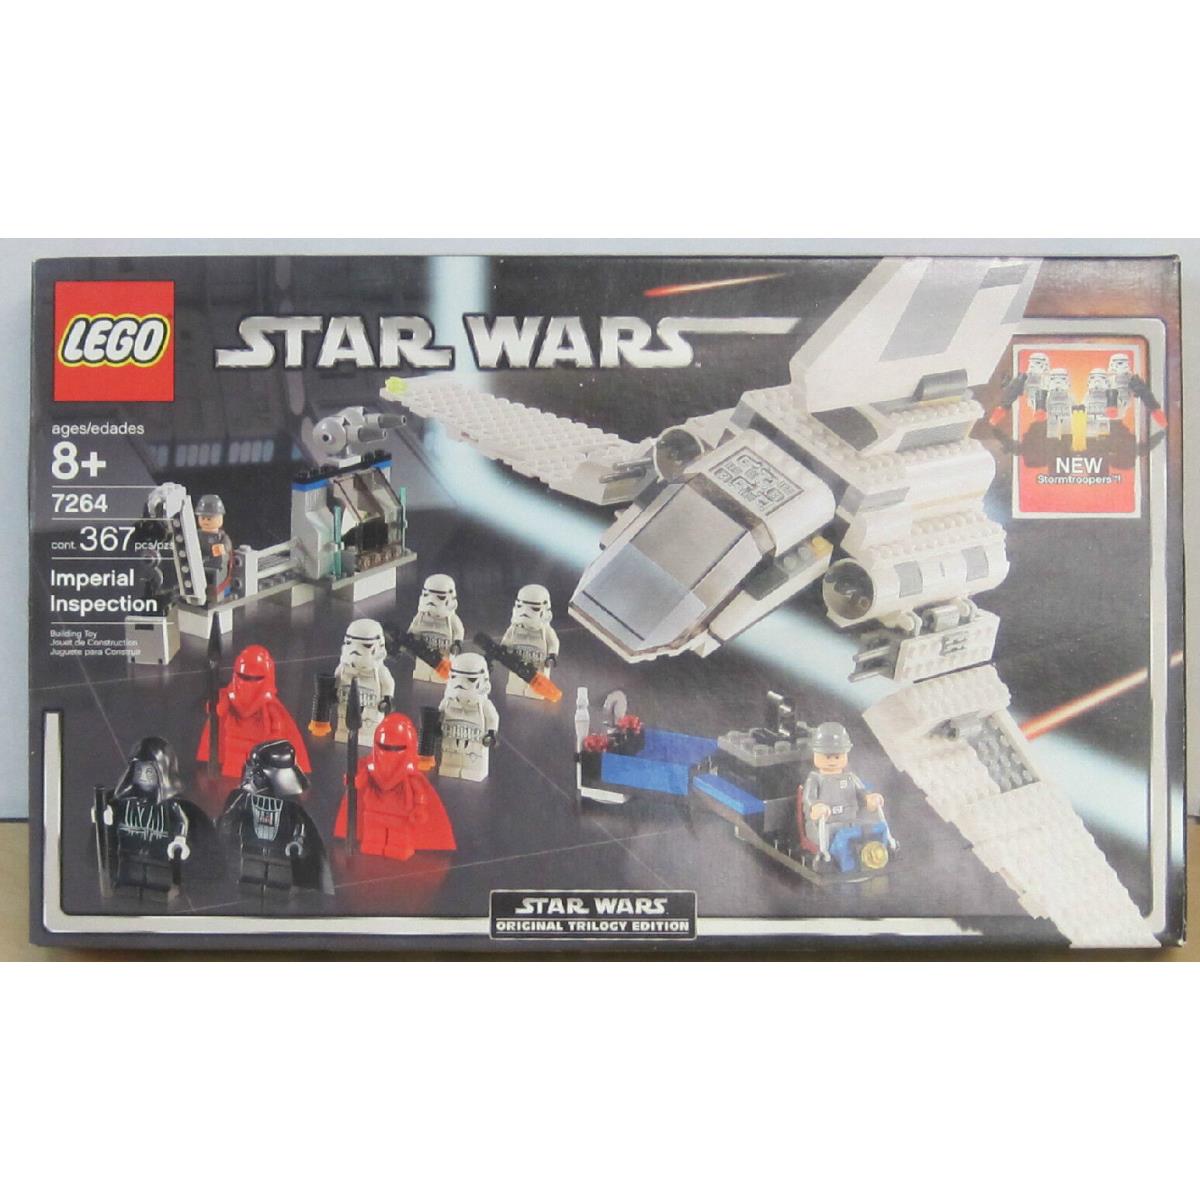 Lego Star Wars 7264 Imperial Inspection